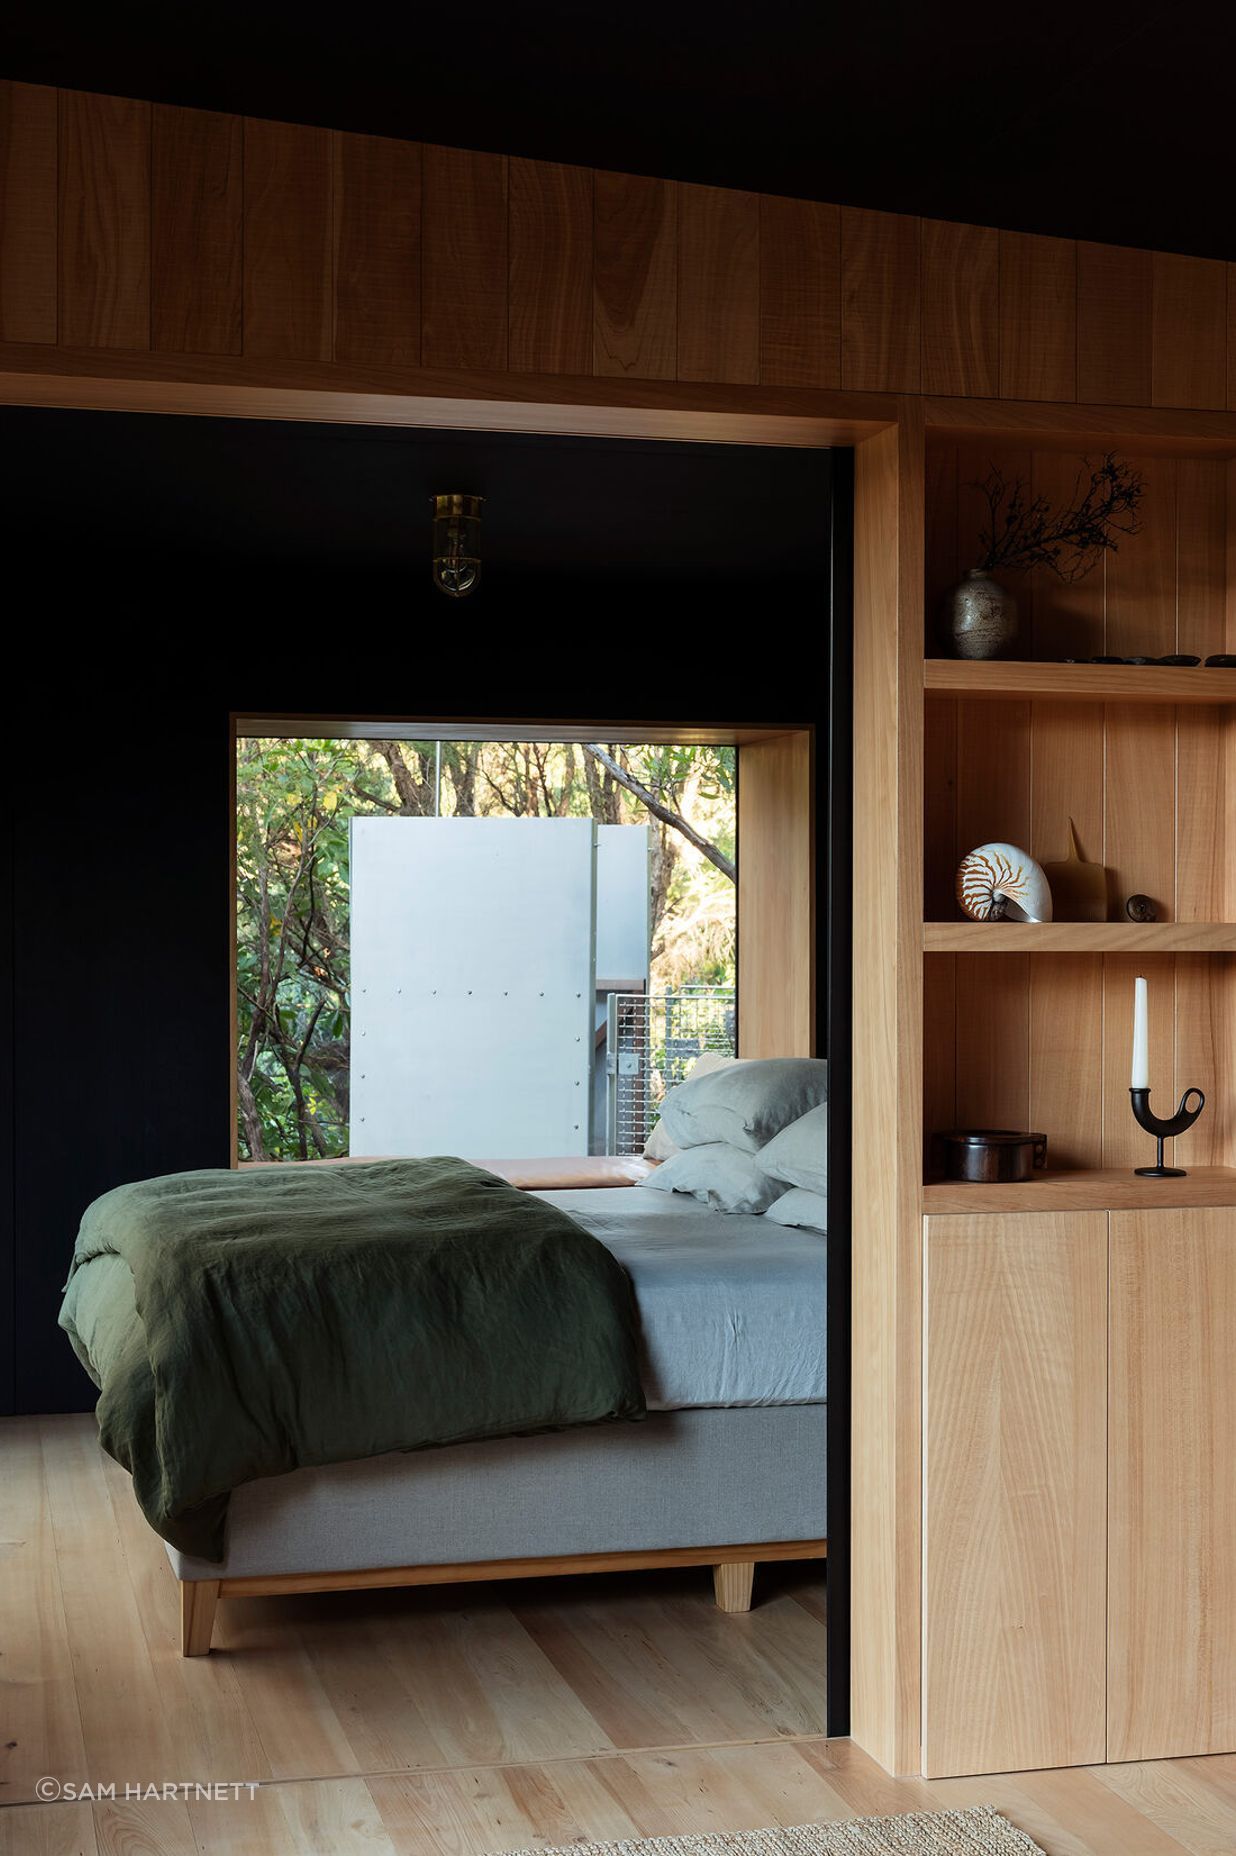 Spaces can be connected and separated by a series of well-placed sliding doors.